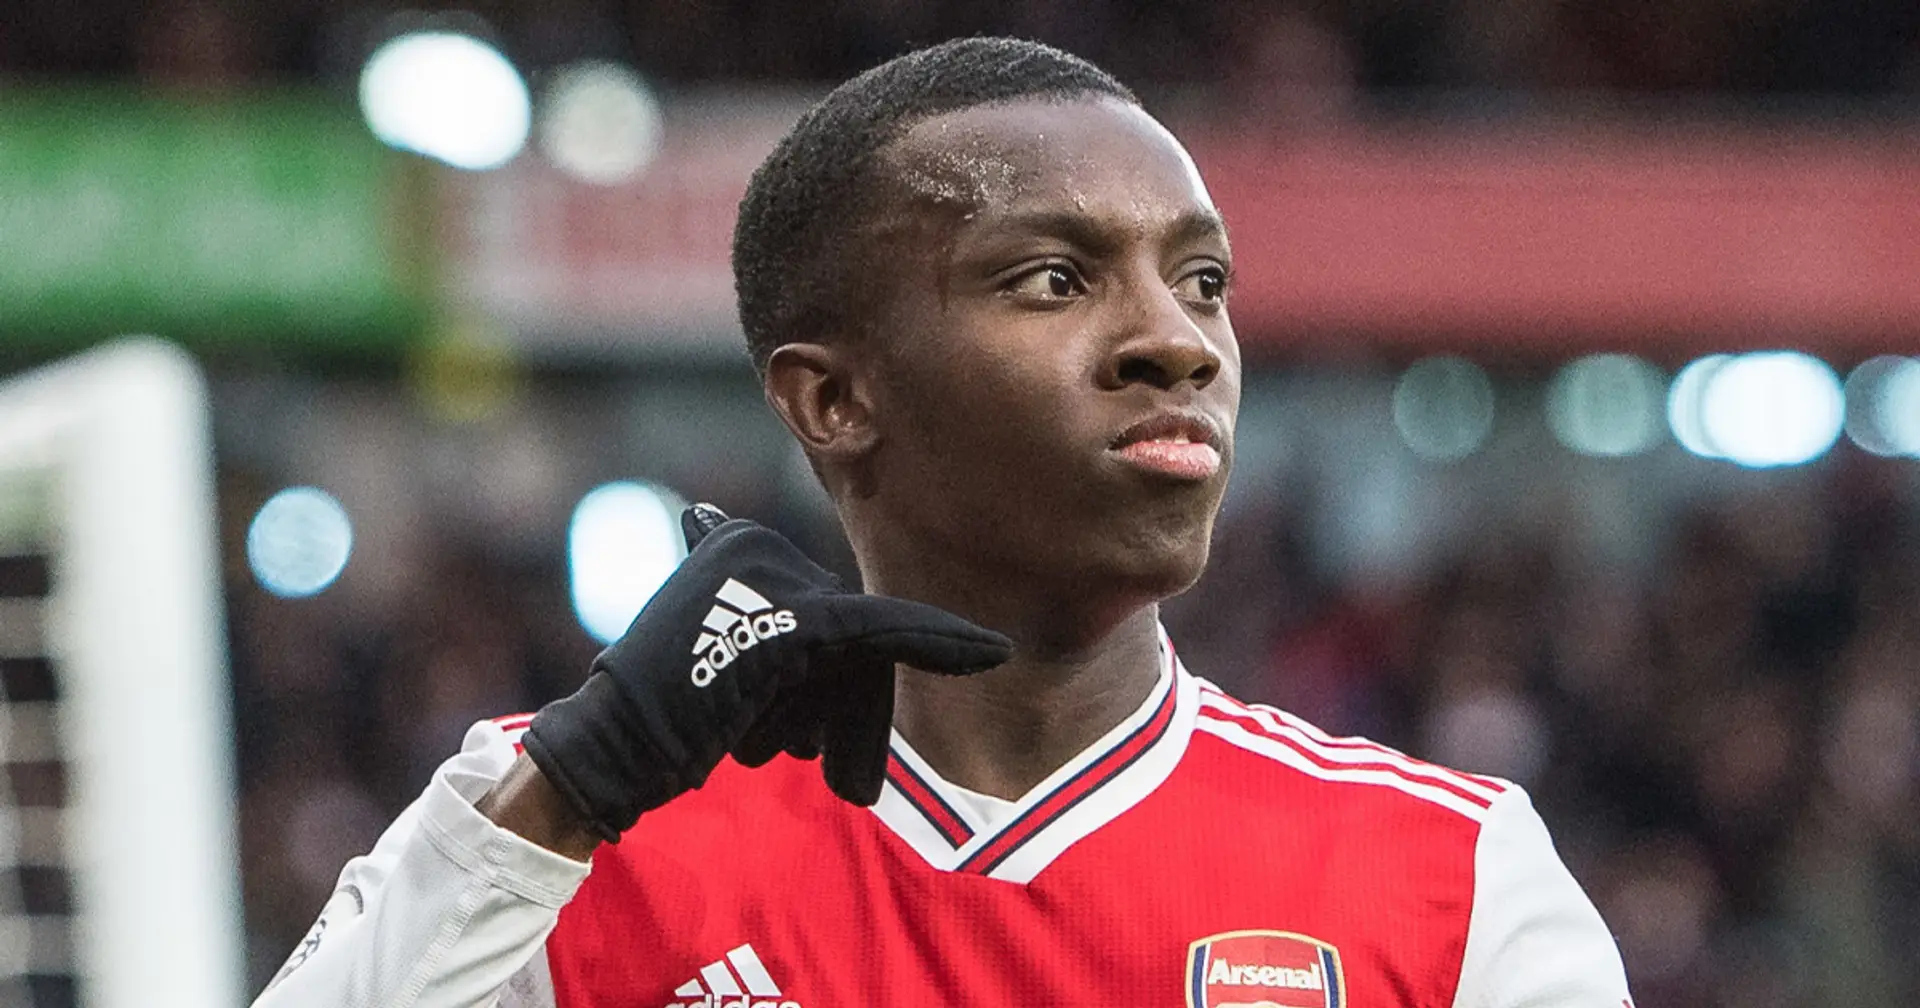 Eddie Nketiah willing to put 'a smile on the fans' faces' as he looks forward to season restart